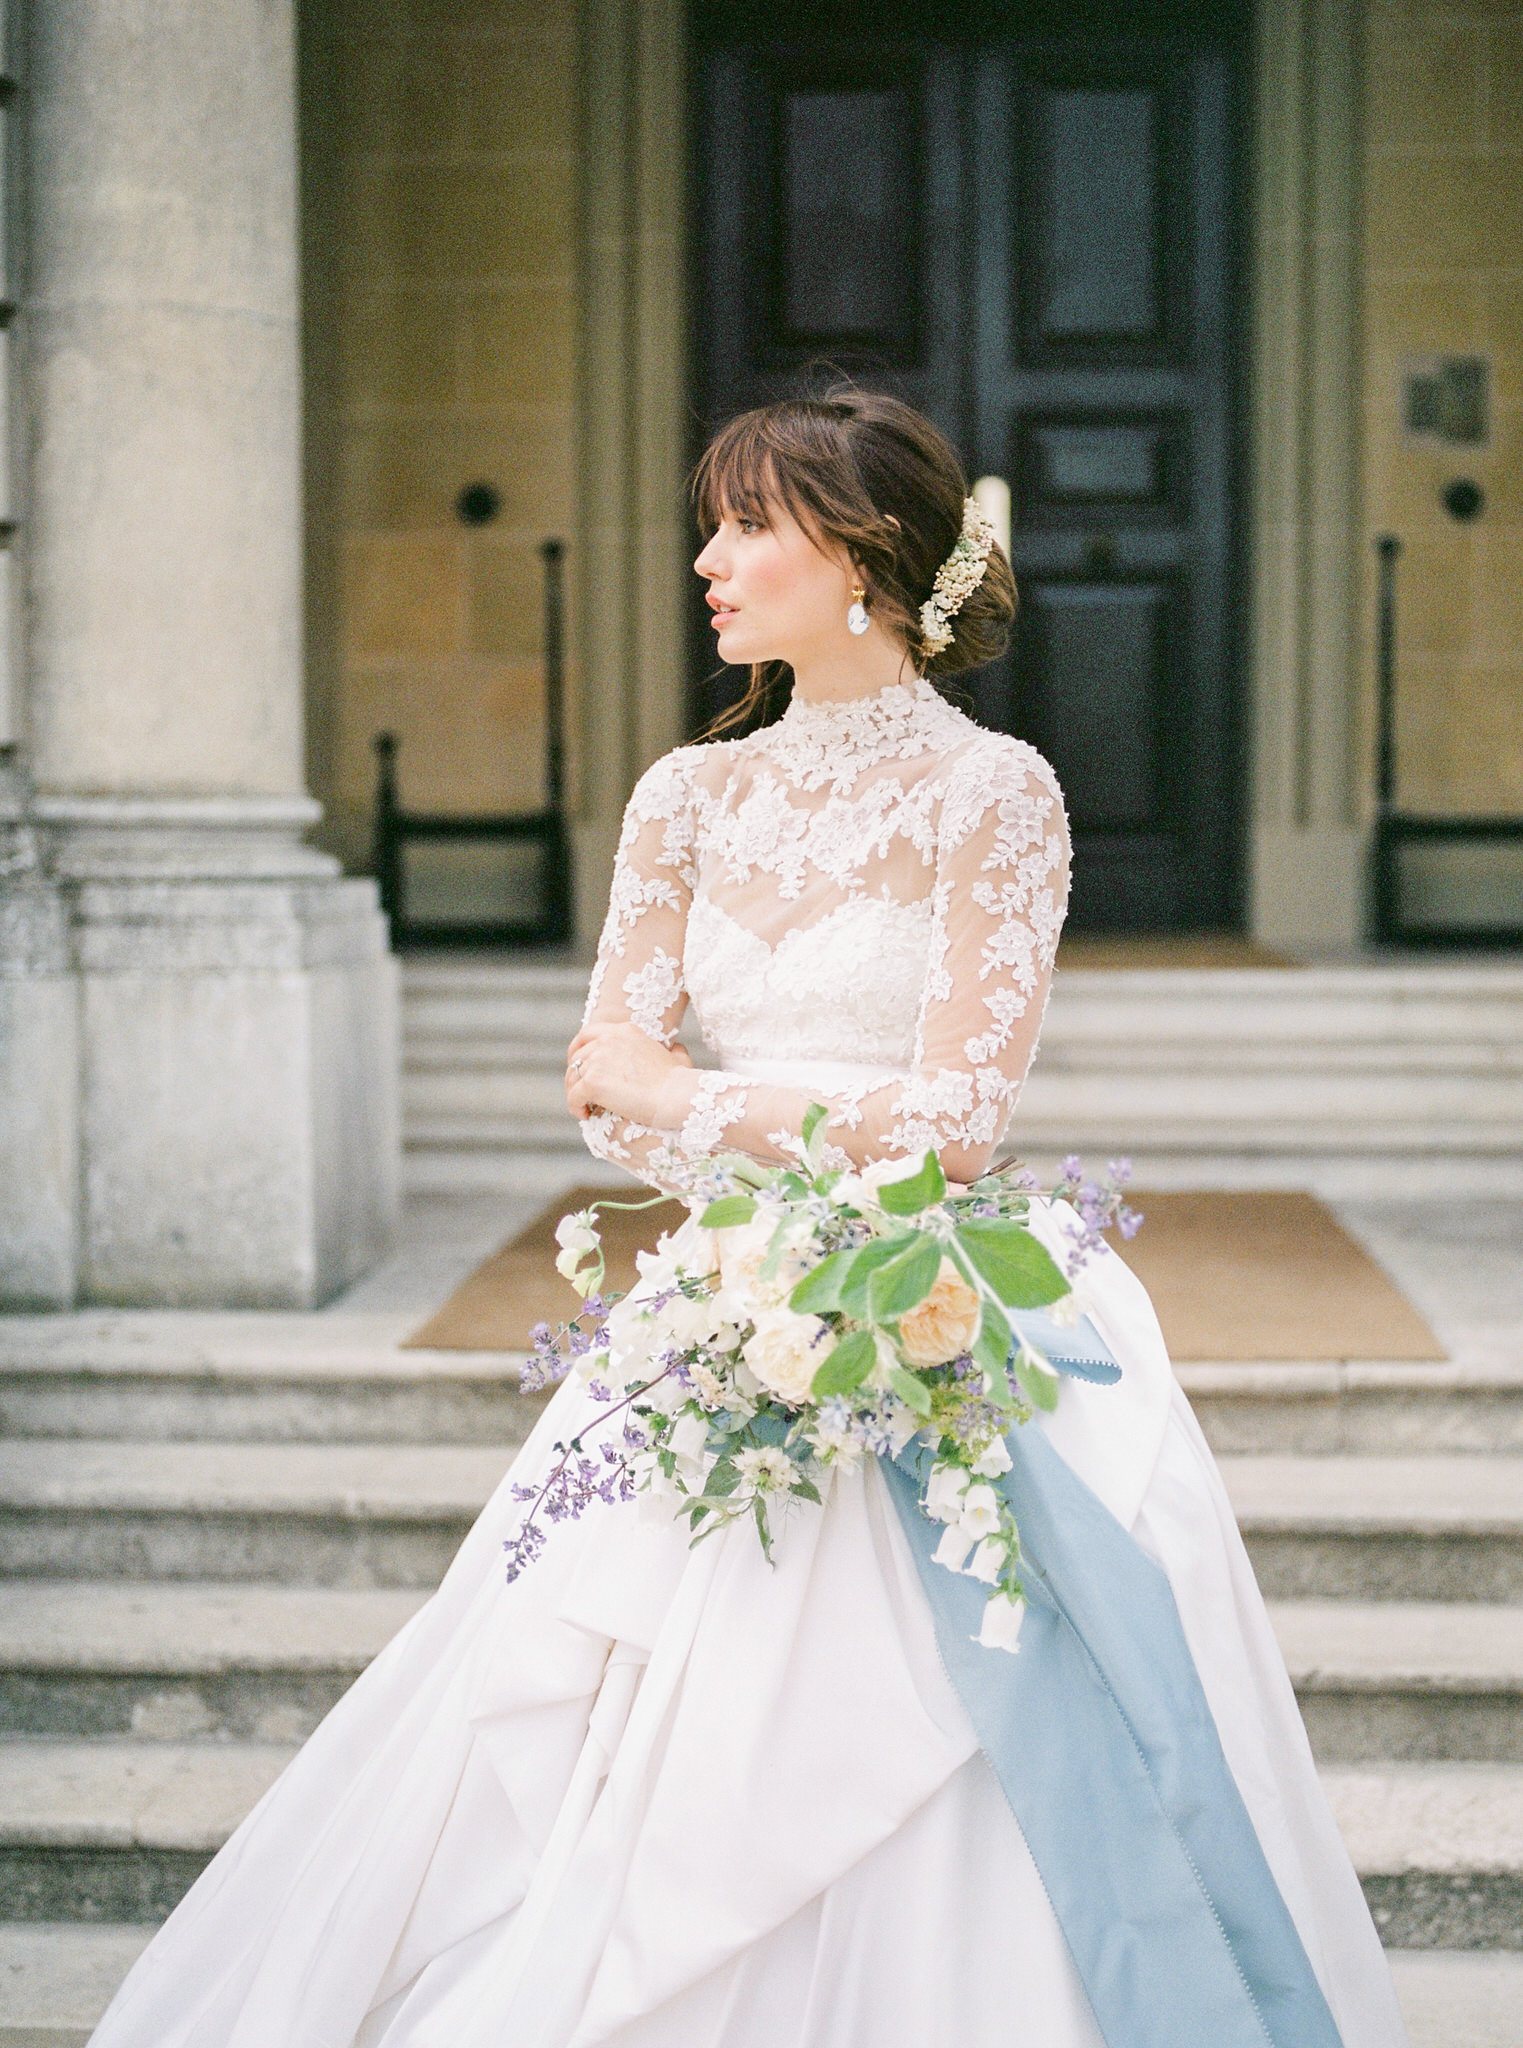 Bride in front of historic building, The Hague wedding photographer